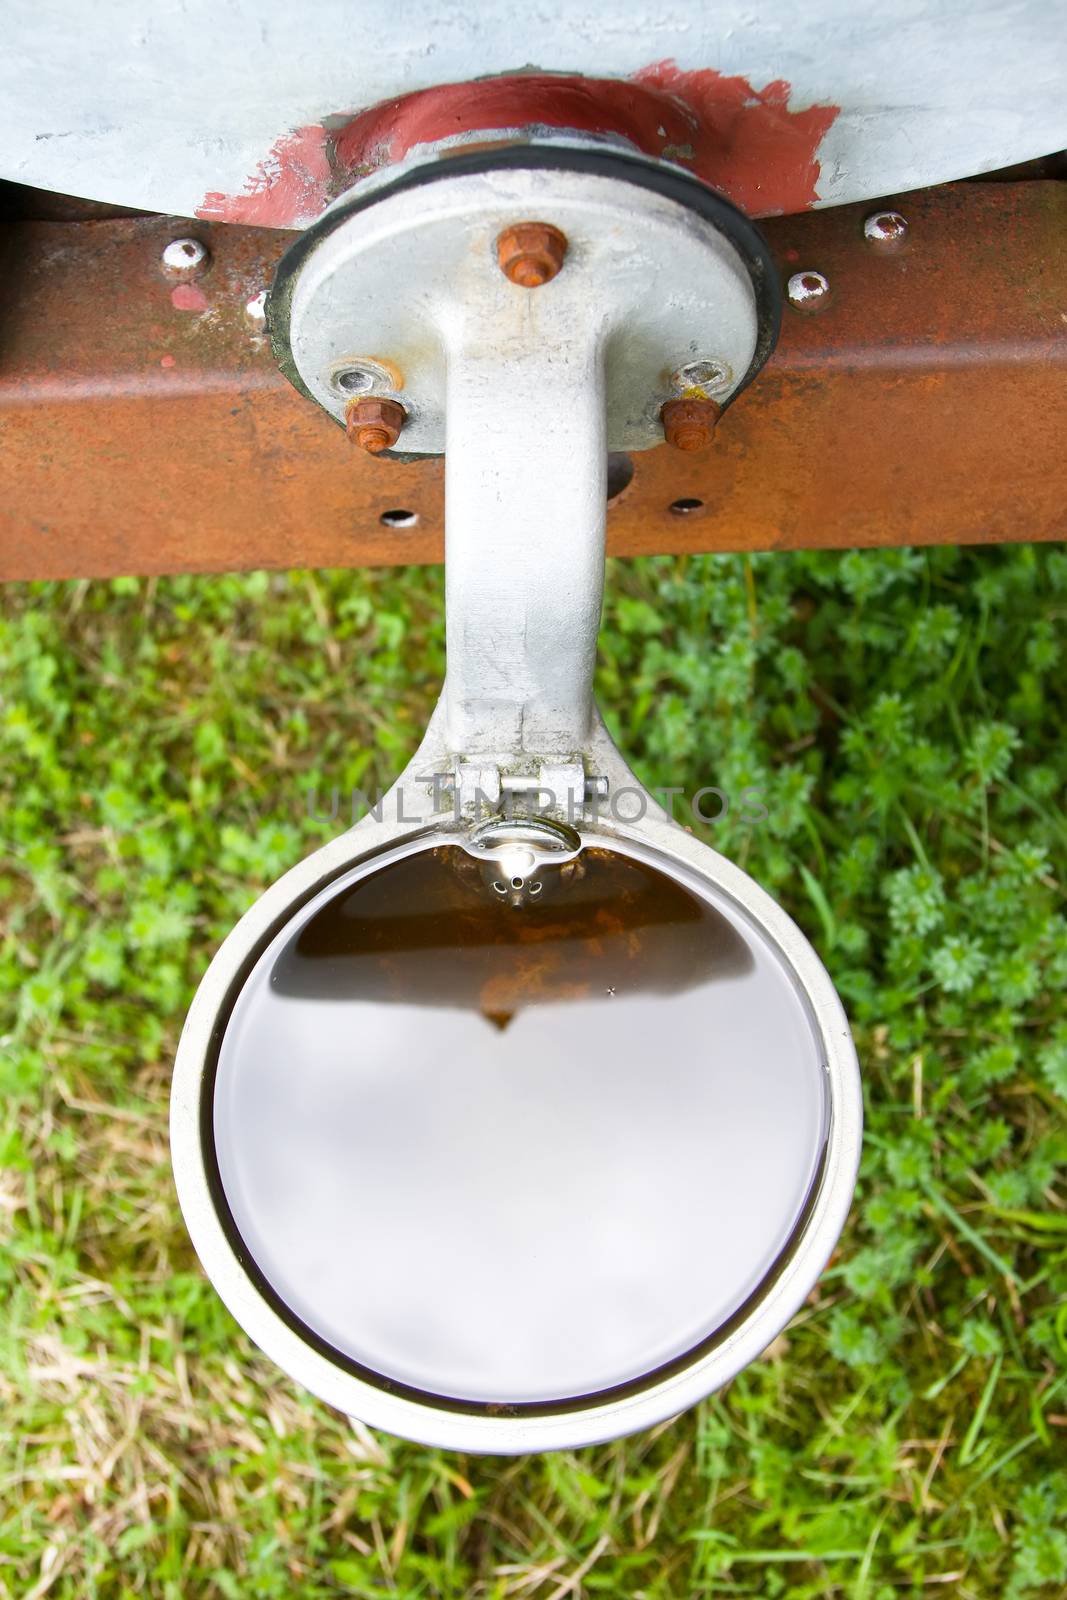 An image of a typical livestock watering